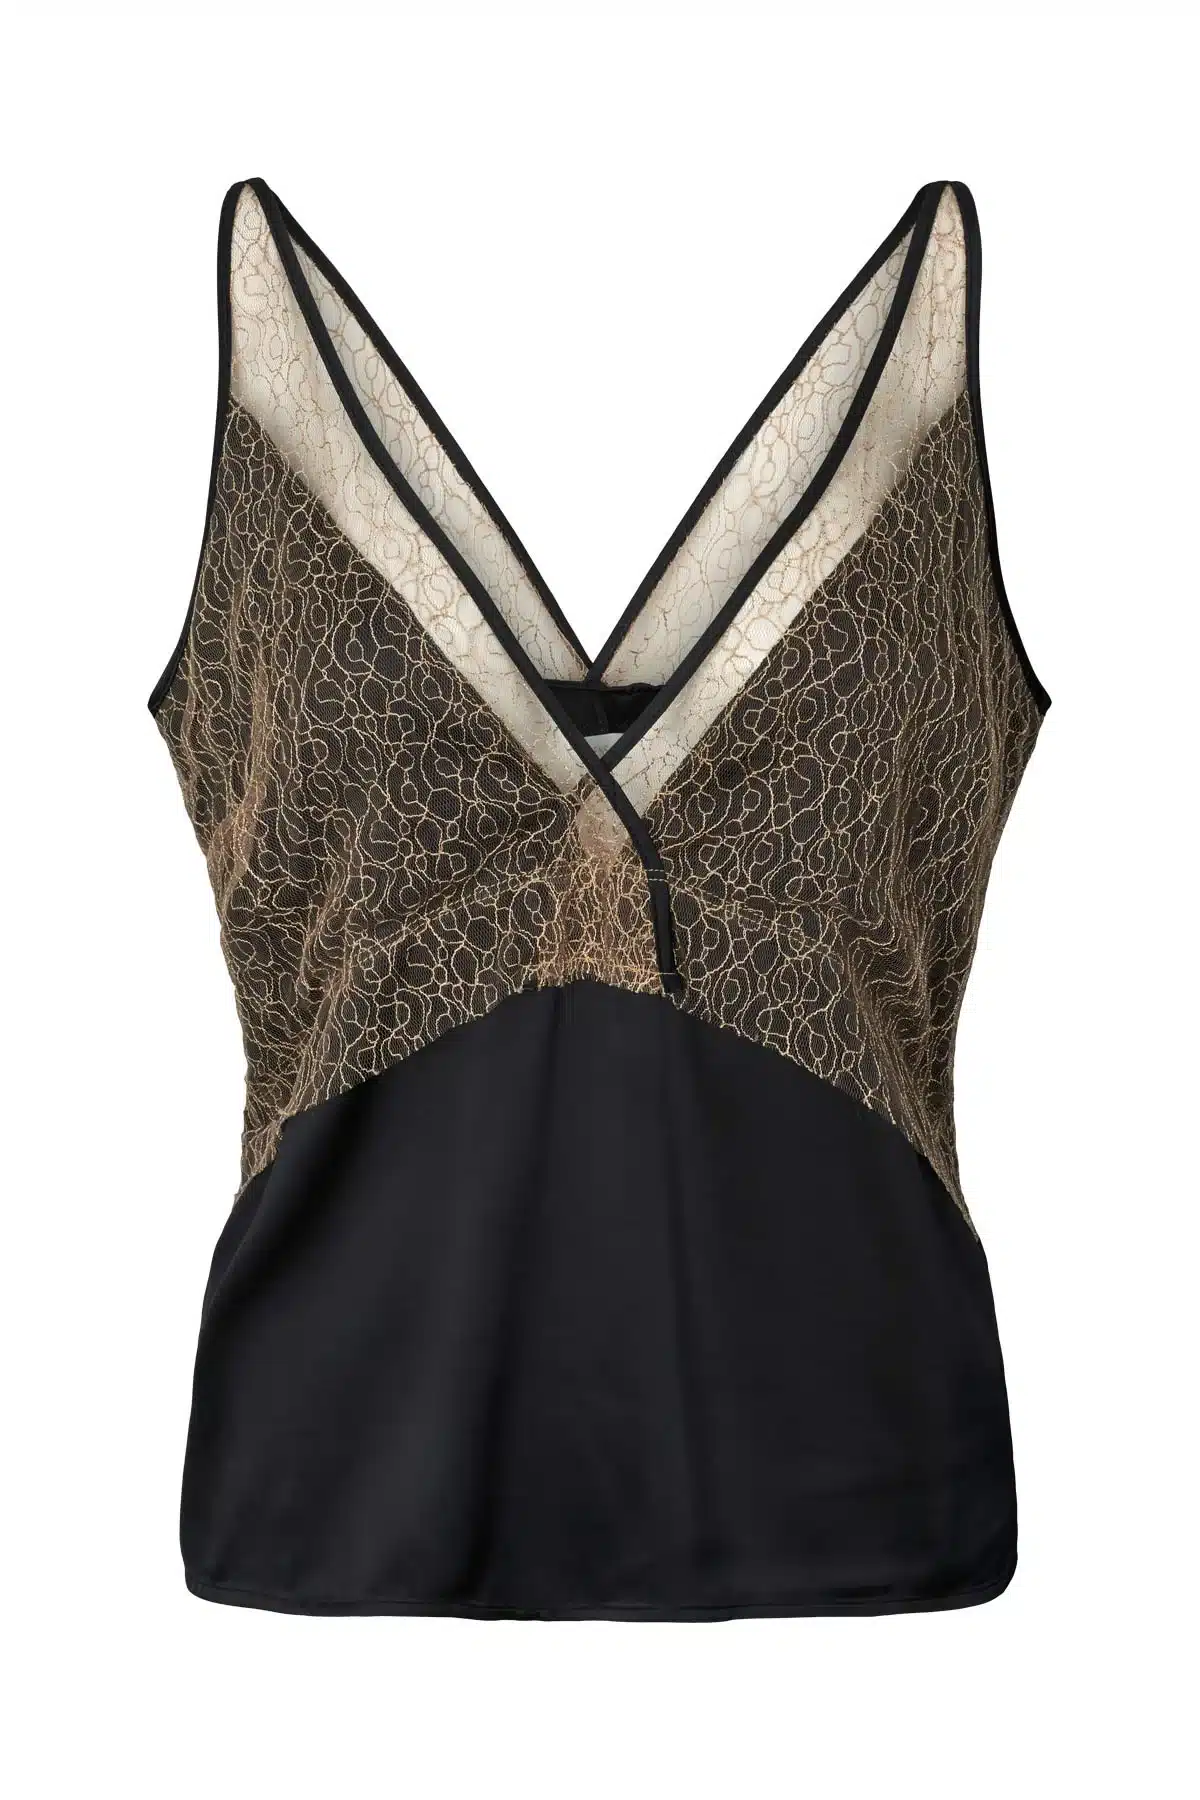 Rabens Talisa Touch Camisole Black - Joan